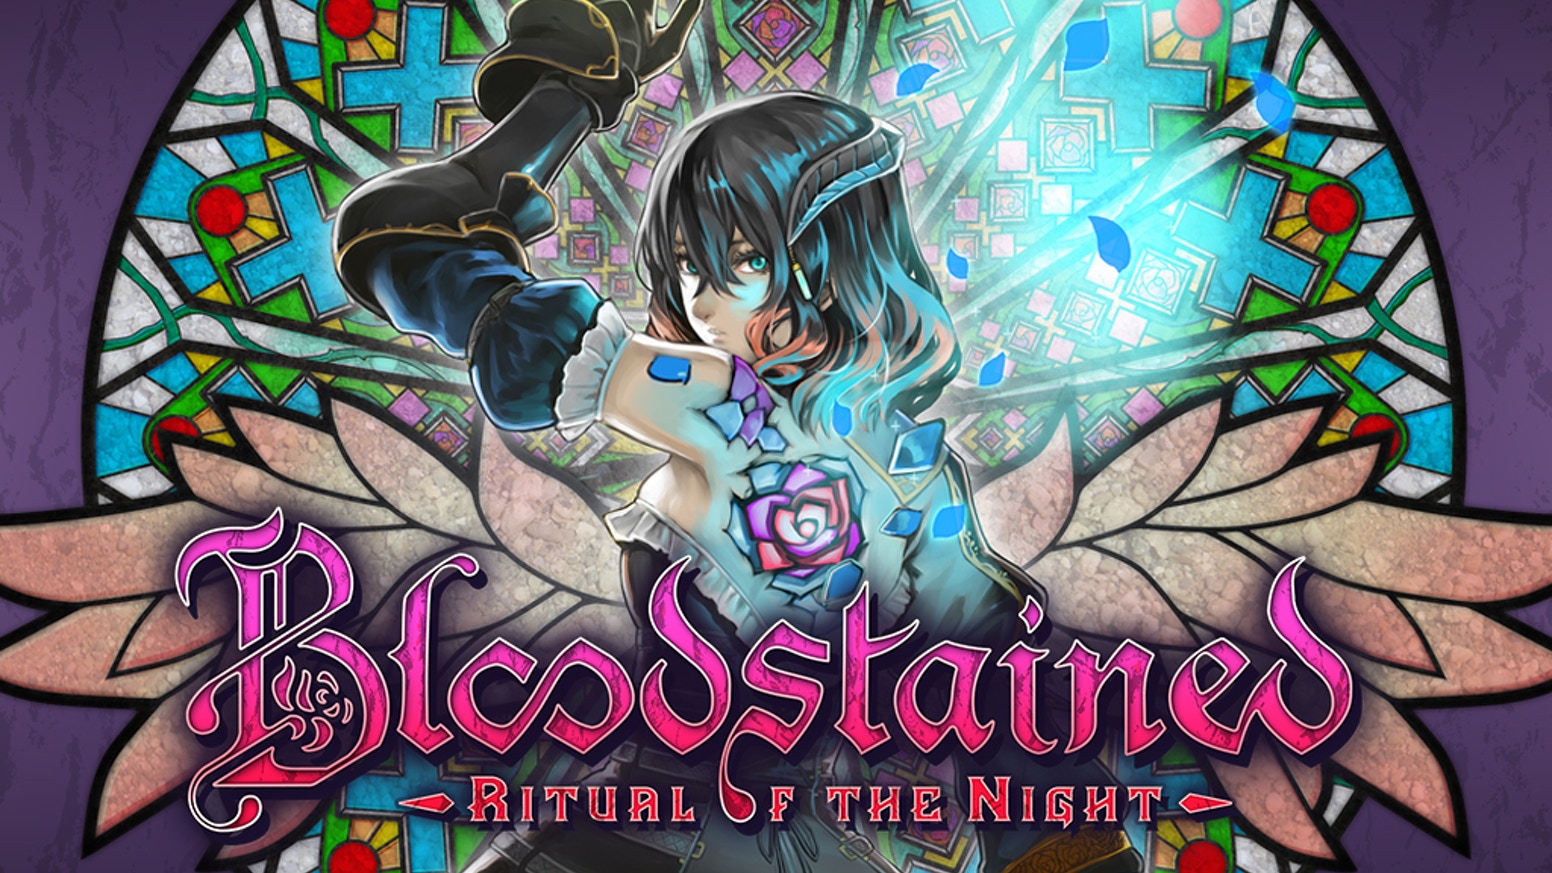 Bloodstained crowdfunding